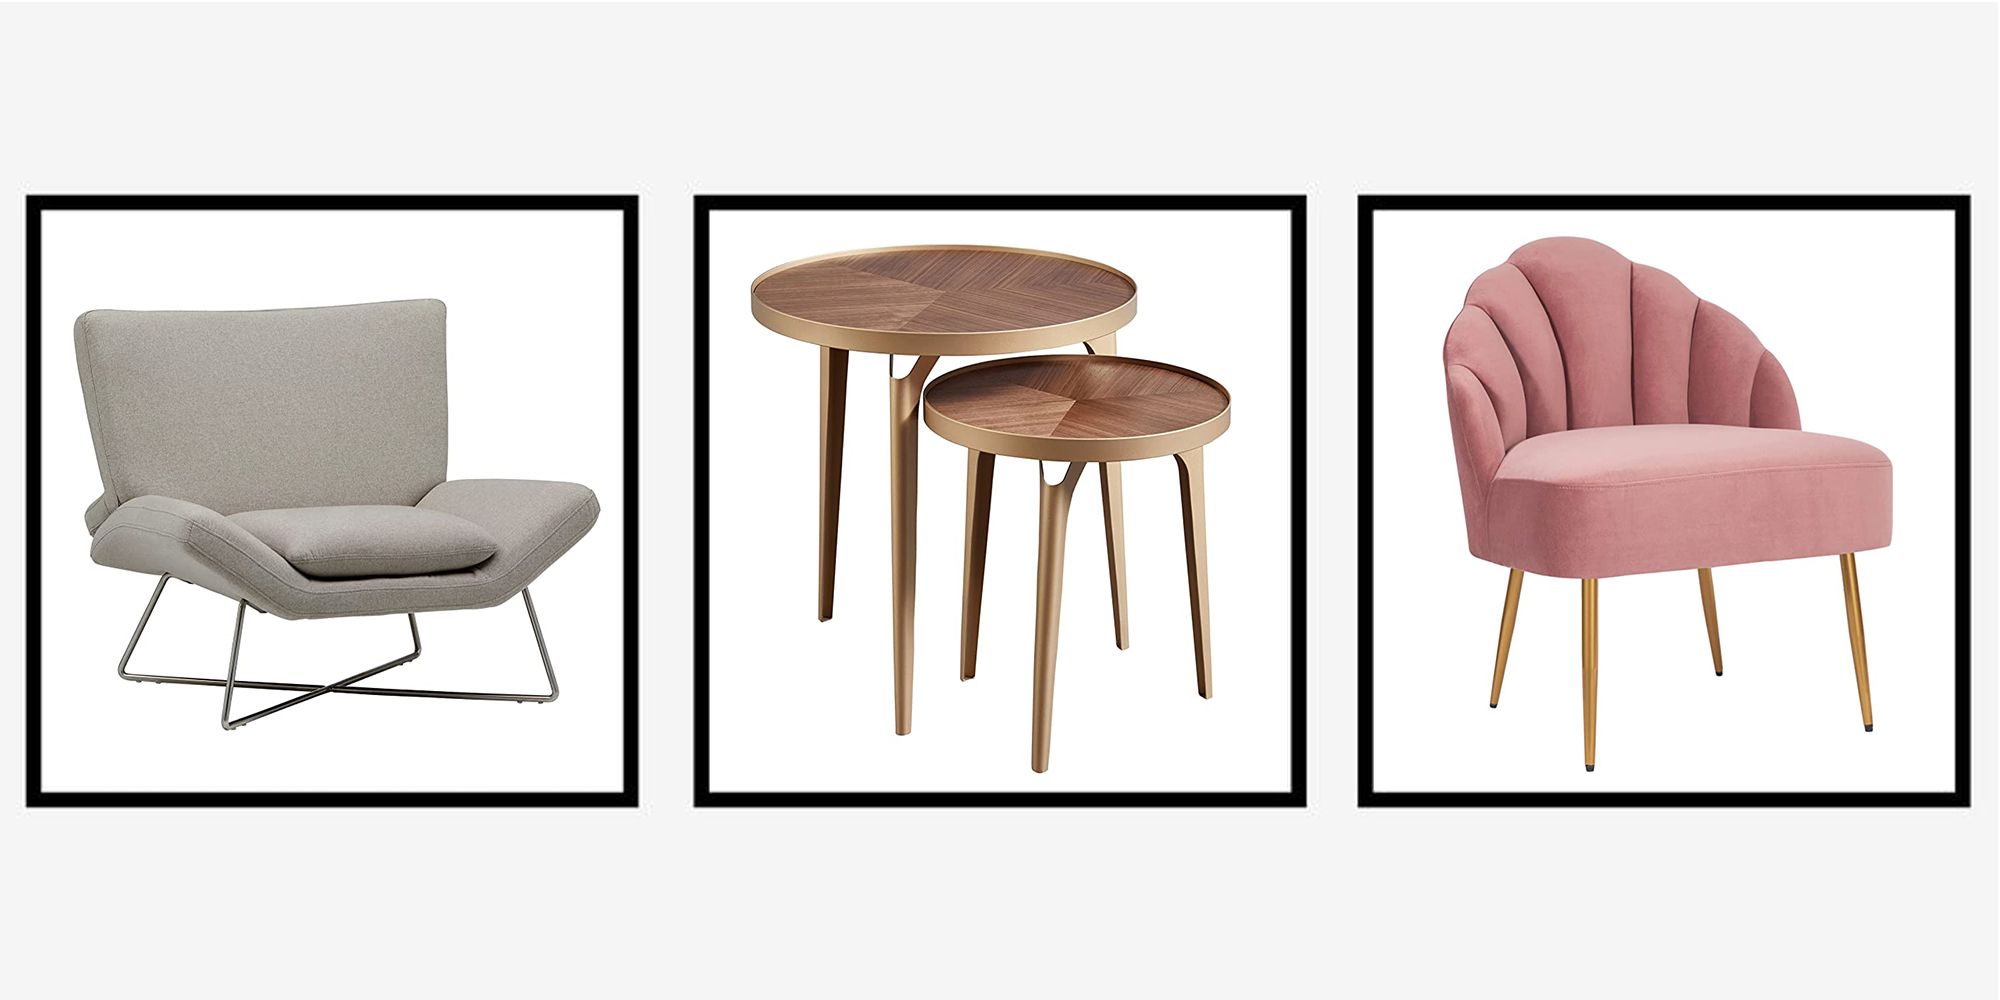 7 Pieces of Amazon Furniture That Look Ultra Luxe